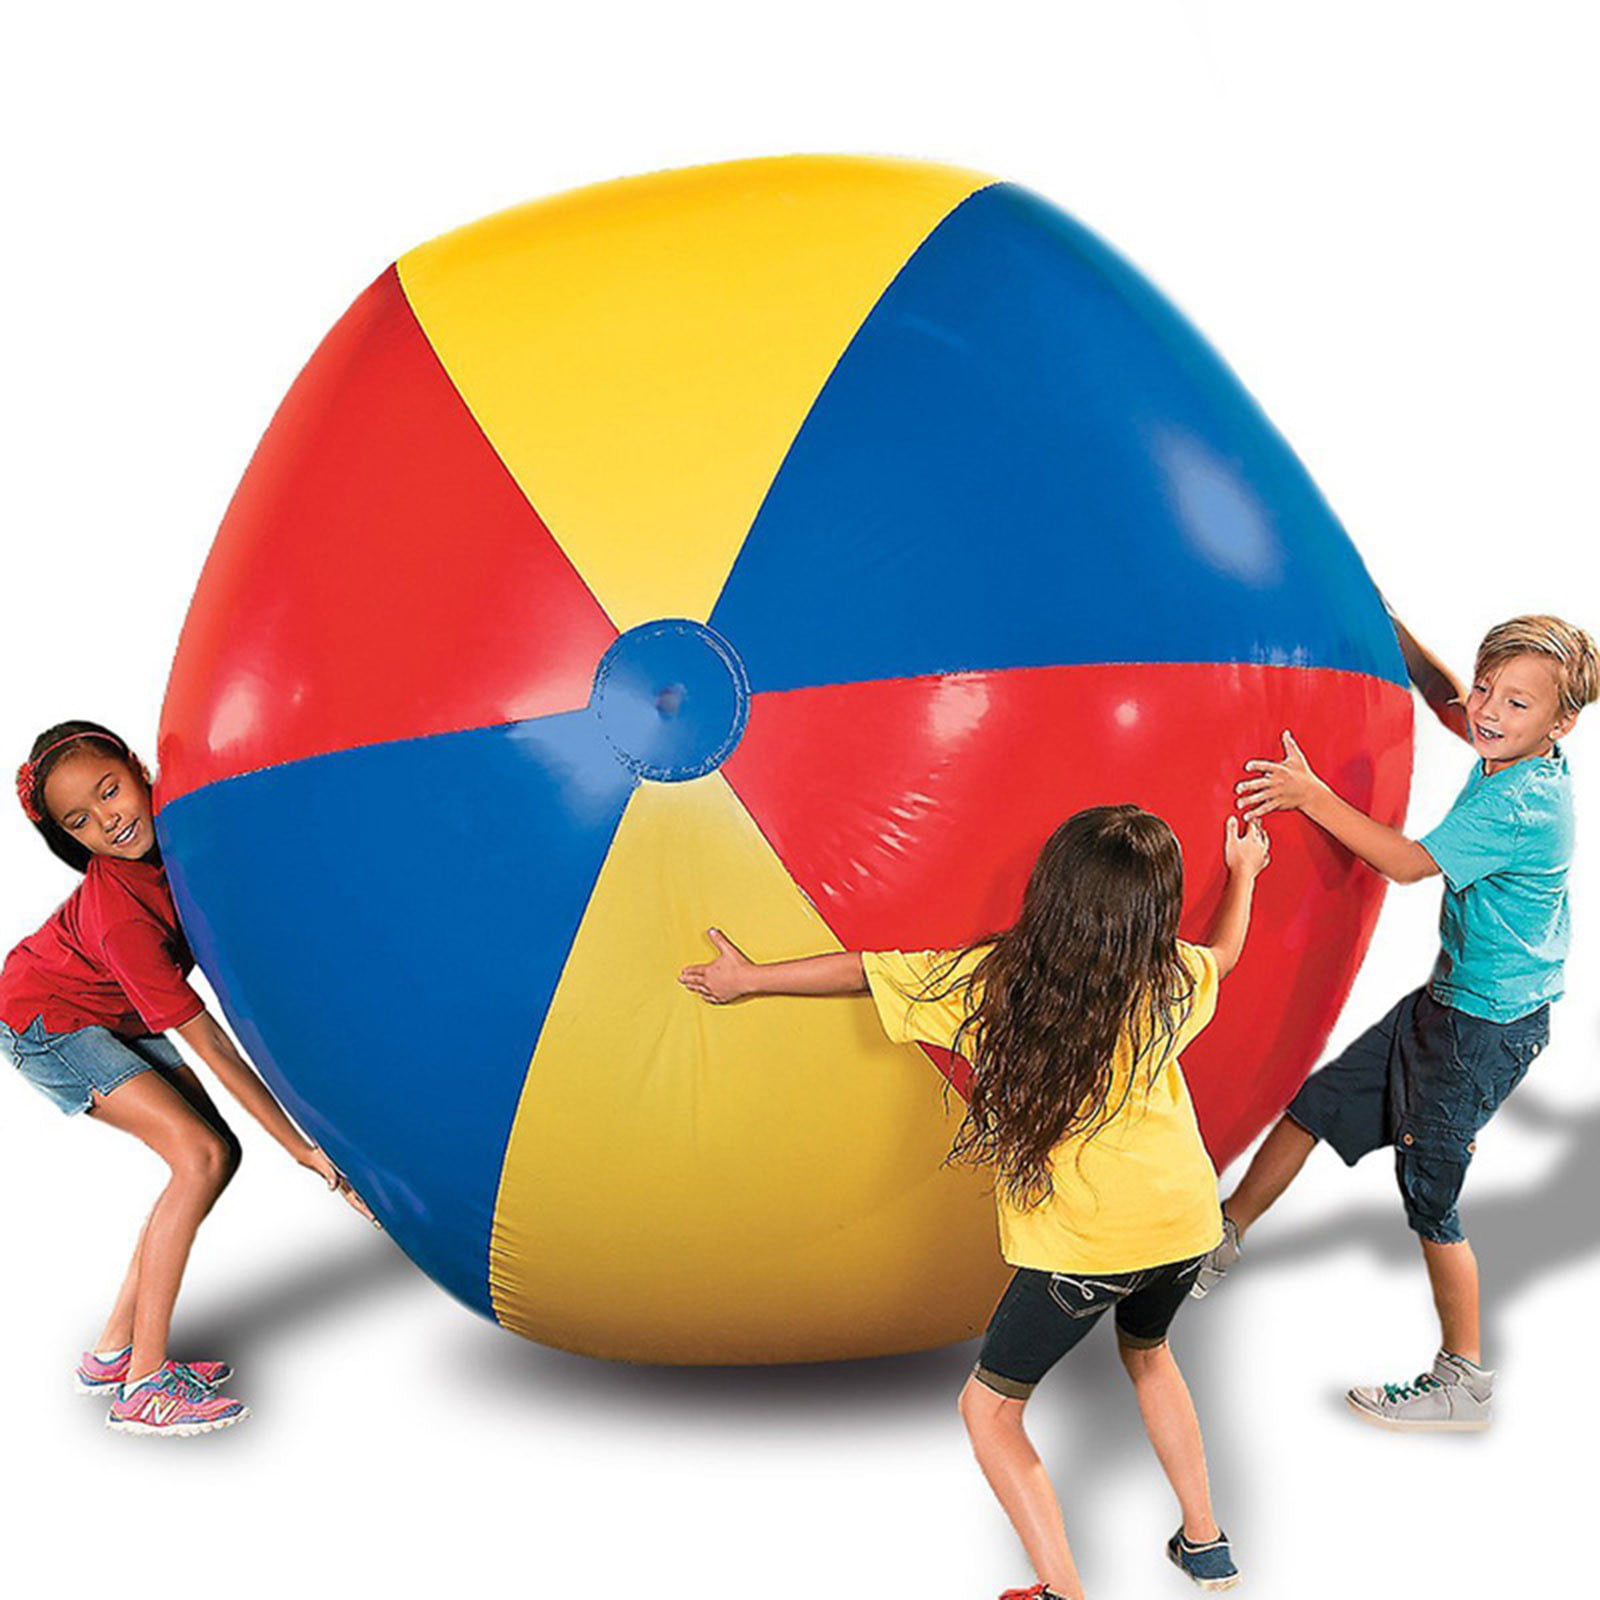 Giant Inflatable Beach Ball Jumbo Size 39.4 Inches Rainbow Inflatable Toy Pool Toy for Kids & Adults Pool Party Beach Toys 